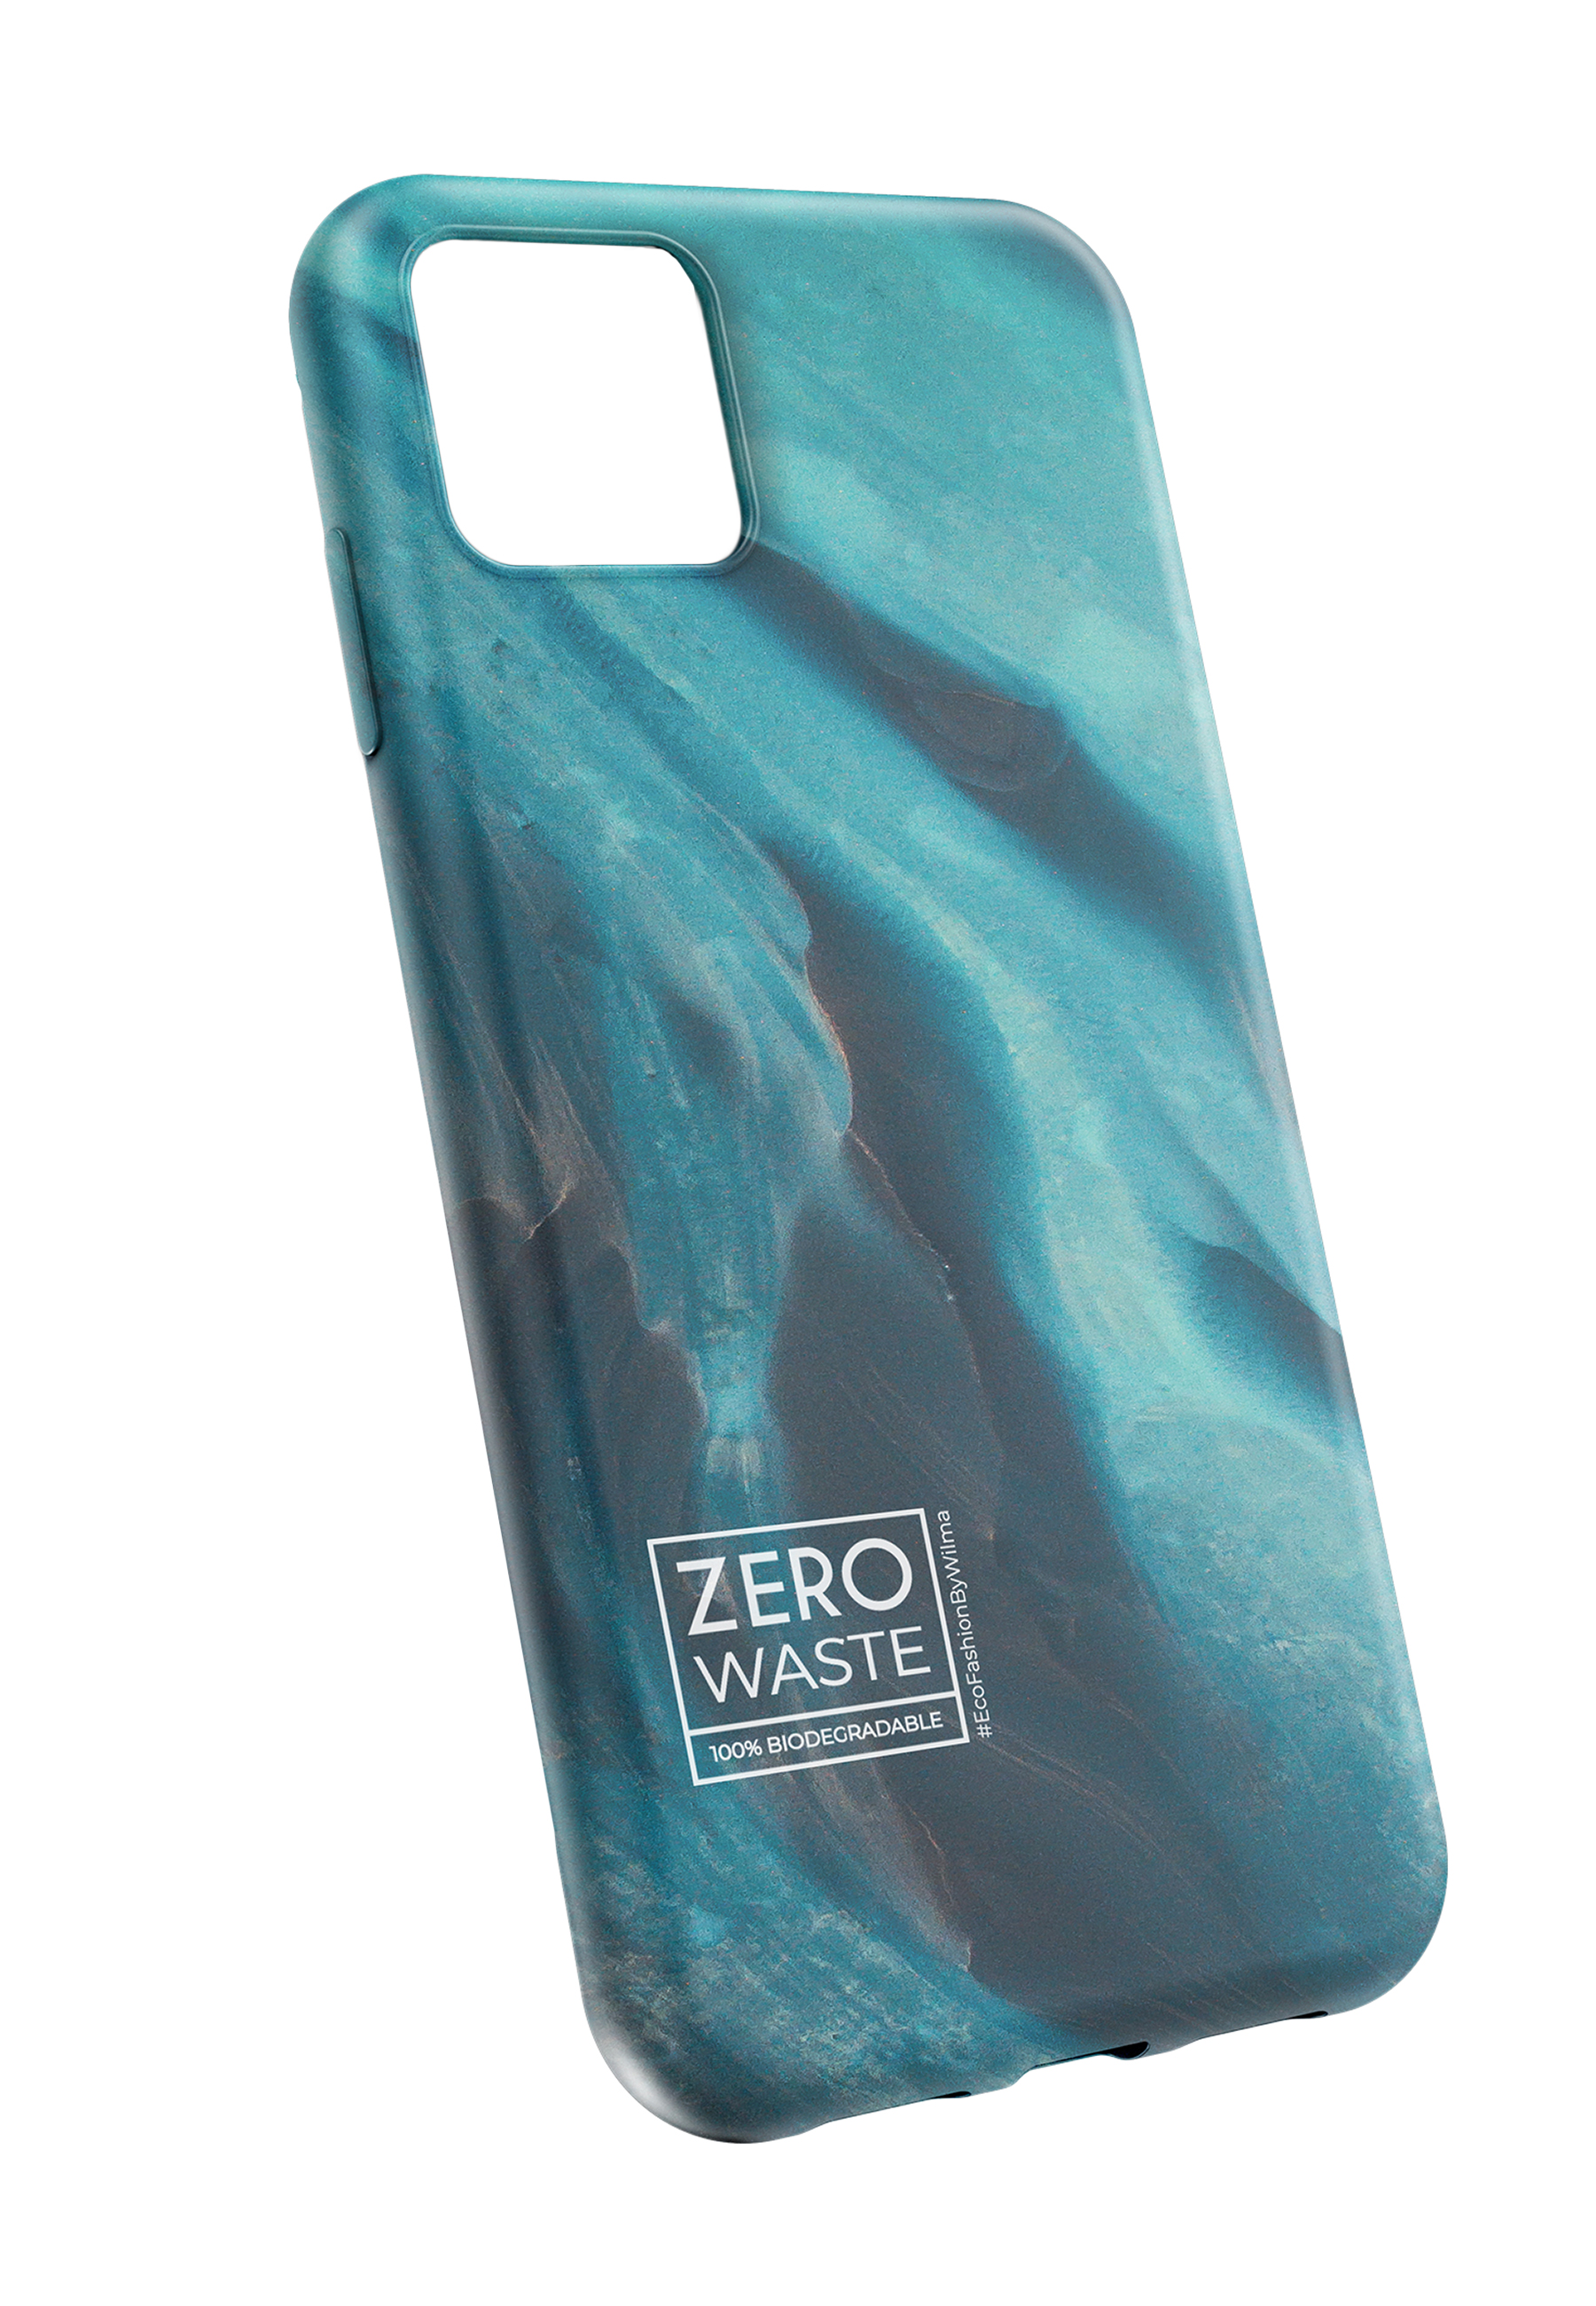 ECO FASHION WILMA 11, BY Backcover, _IP11, blue iPhone Apple